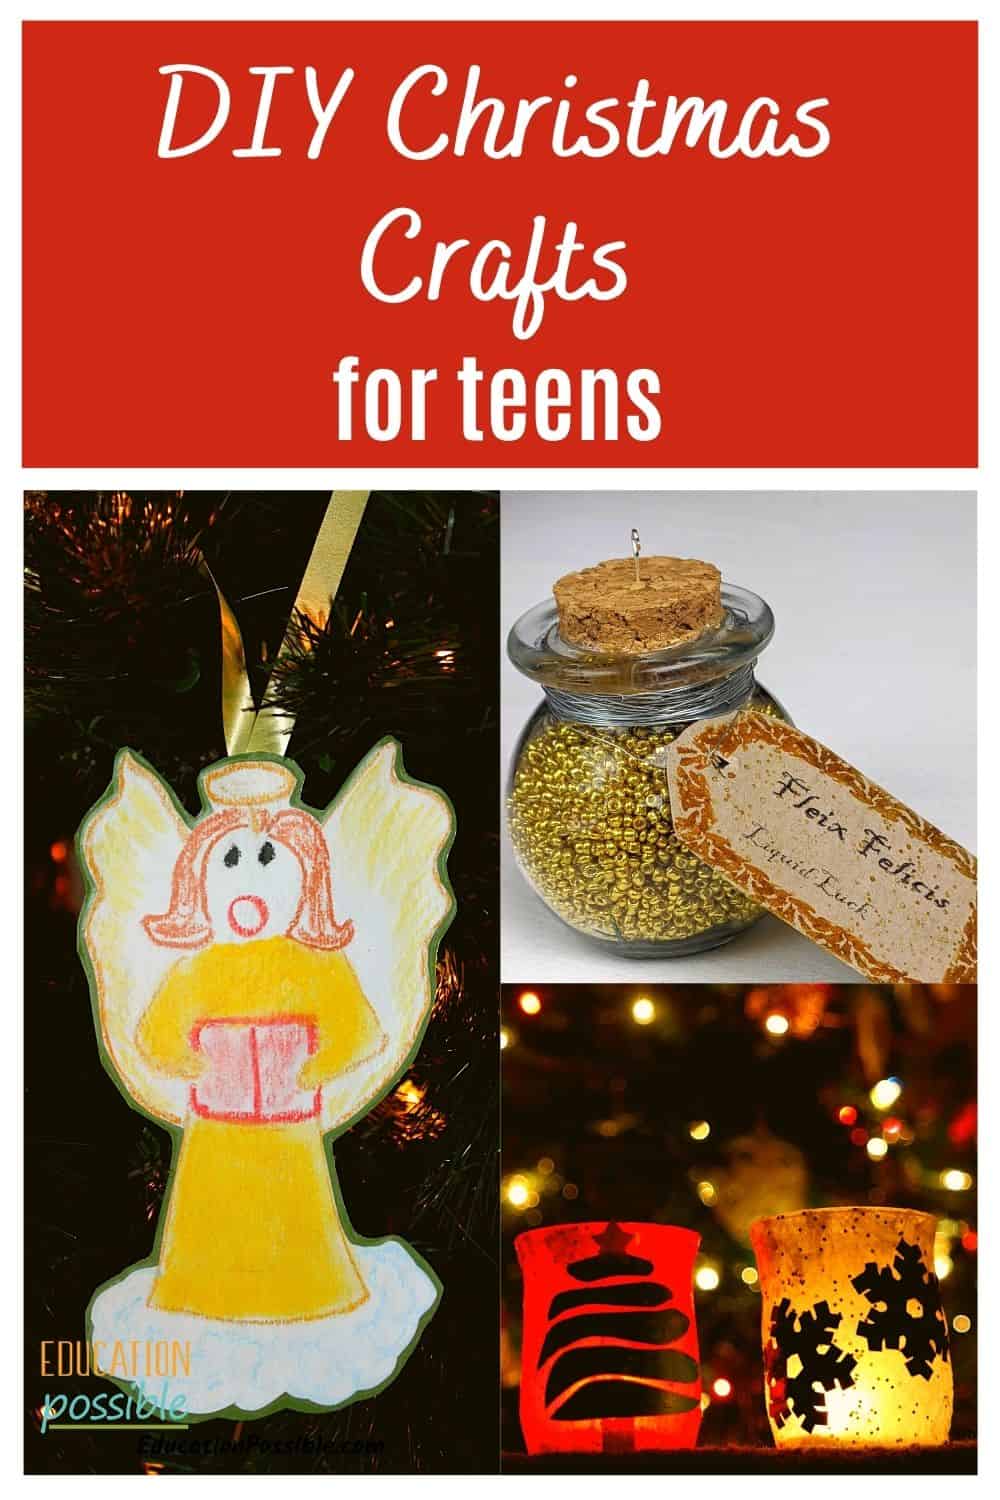 3 different DIY crafts for Christmas